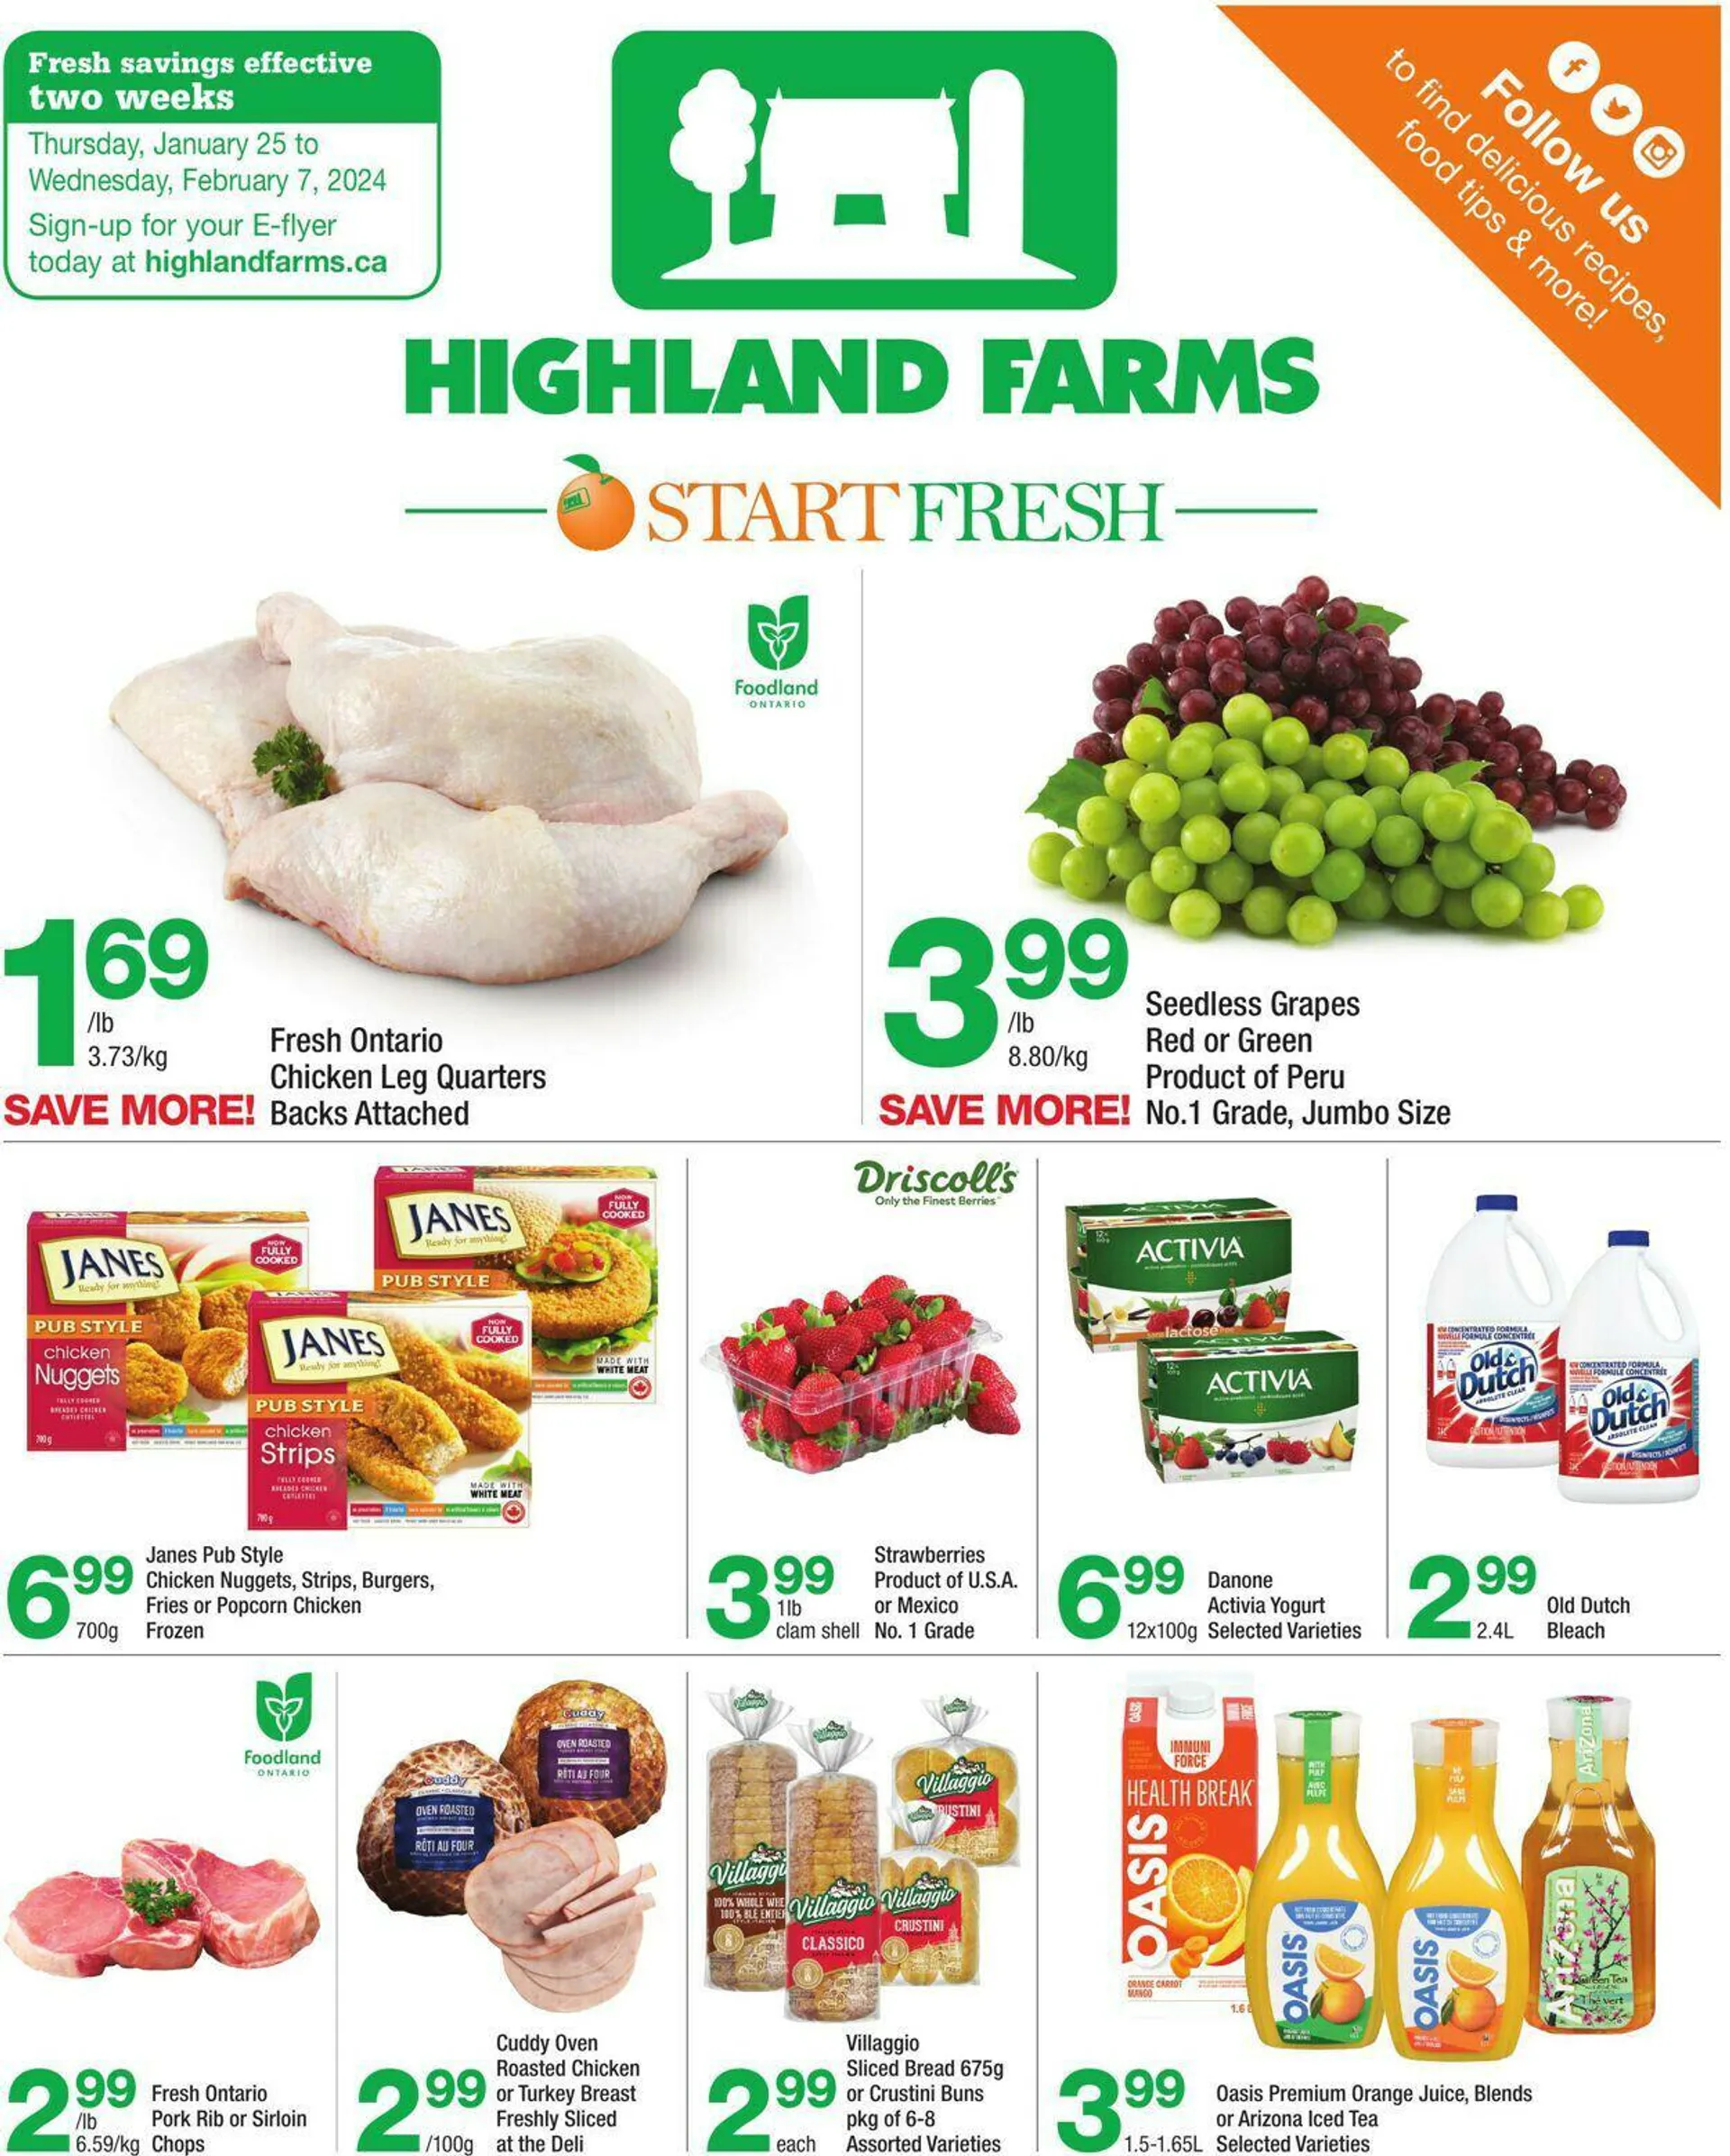 Highland Farms Current flyer from January 25 to February 7 2024 - flyer page 